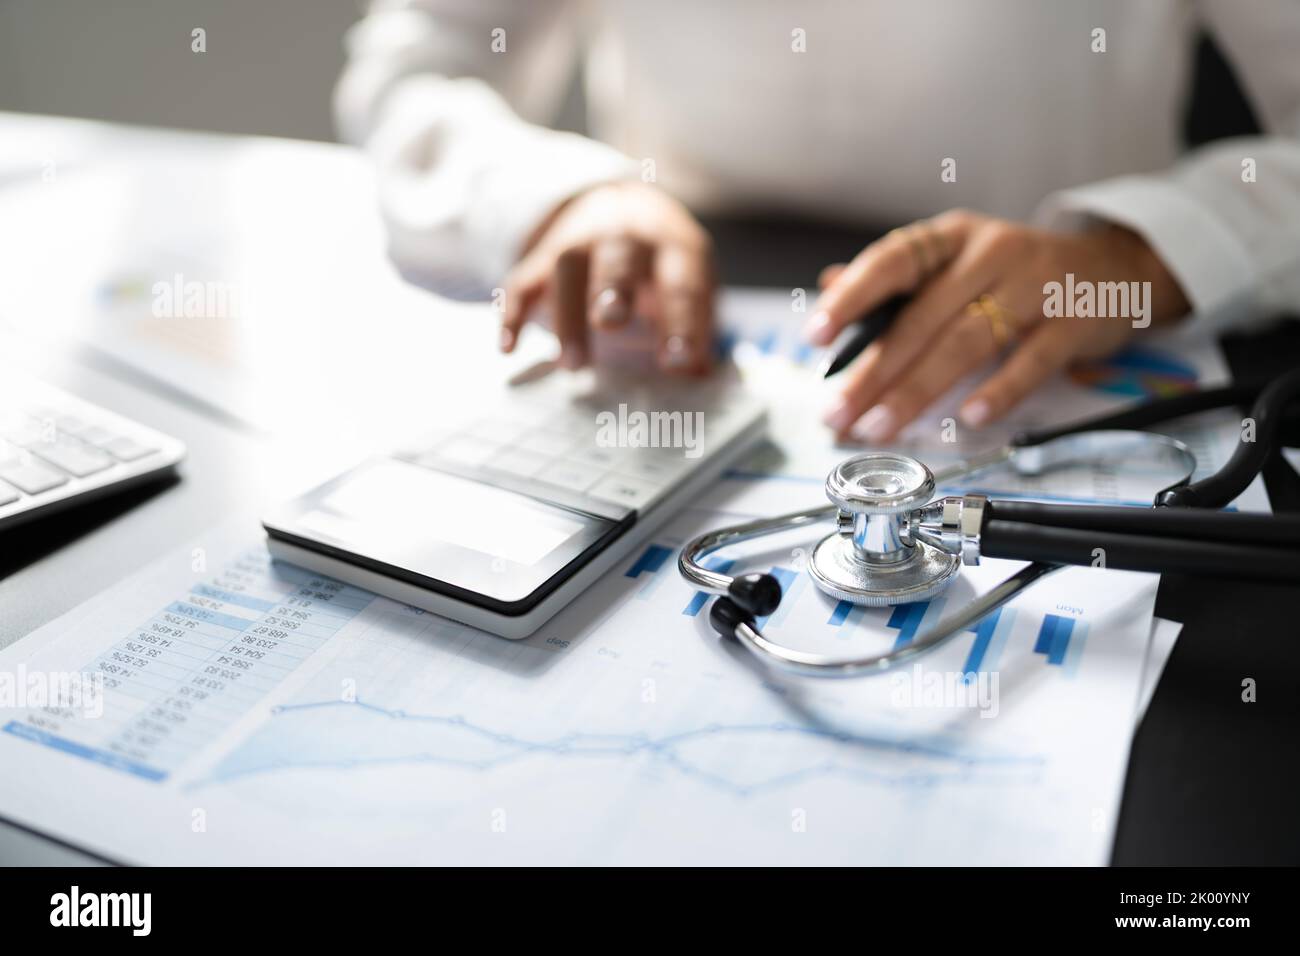 Health Insurance And Medical Diagnostic. Healthcare Industry Investment Stock Photo